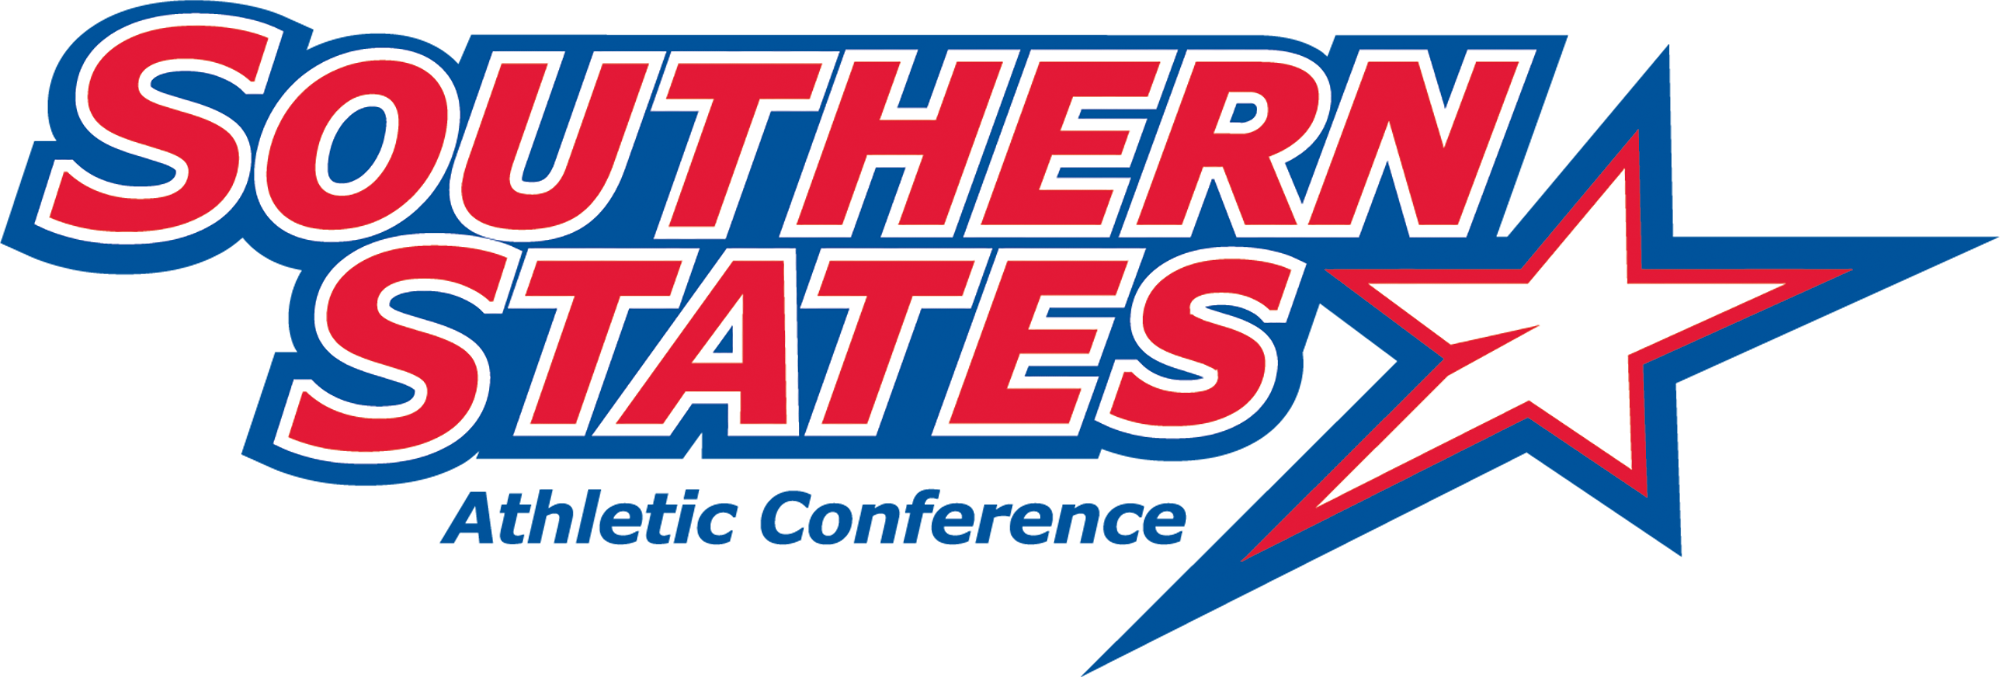 Southern States Athletic Conference